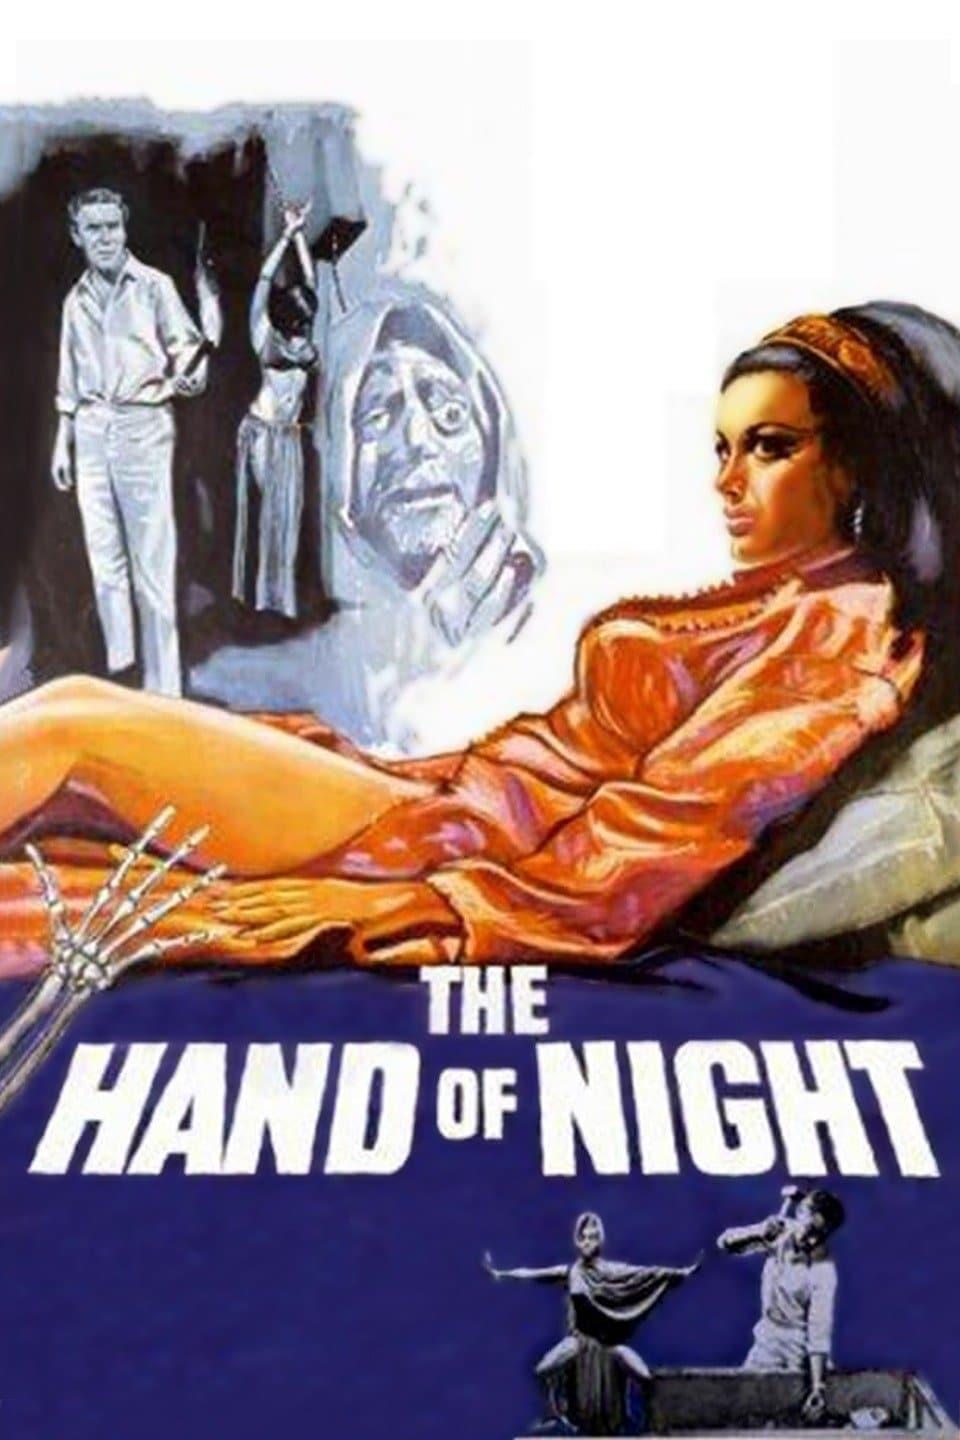 The Hand of Night poster